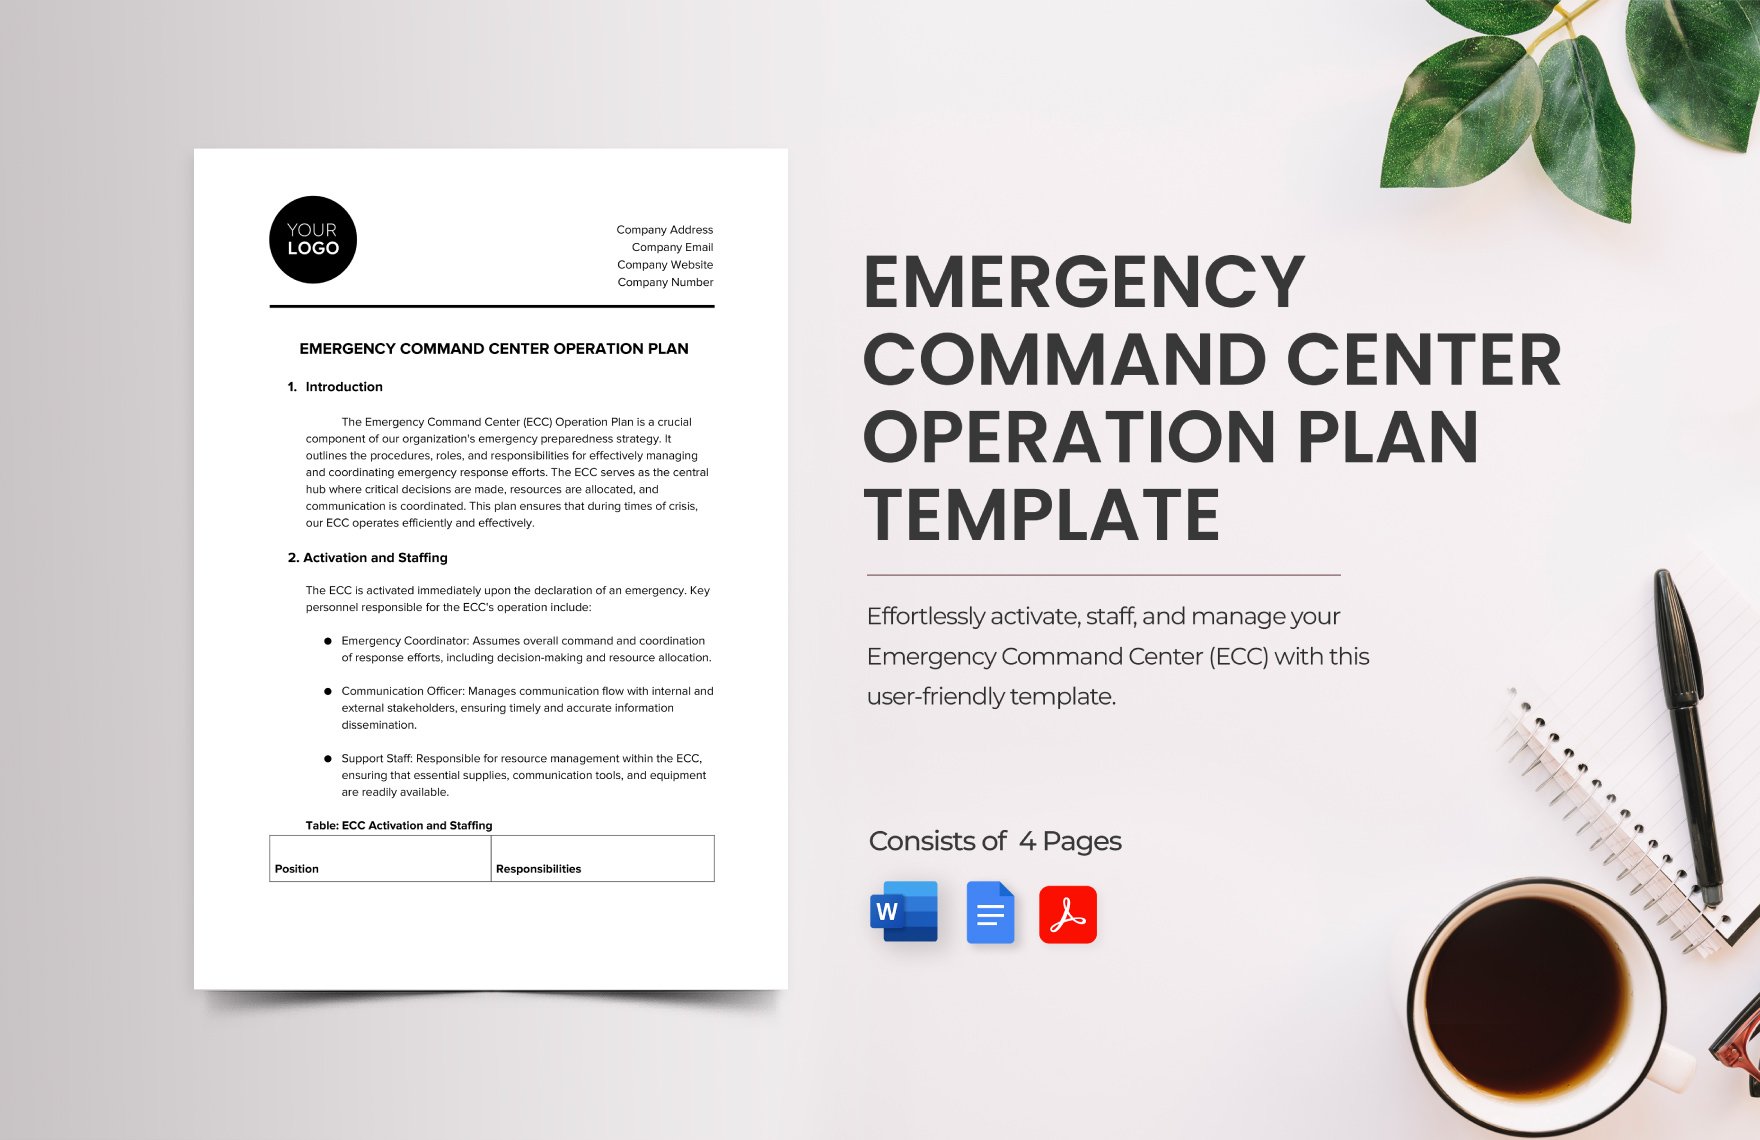 Emergency Command Center Operation Plan Template in Word, Google Docs, PDF